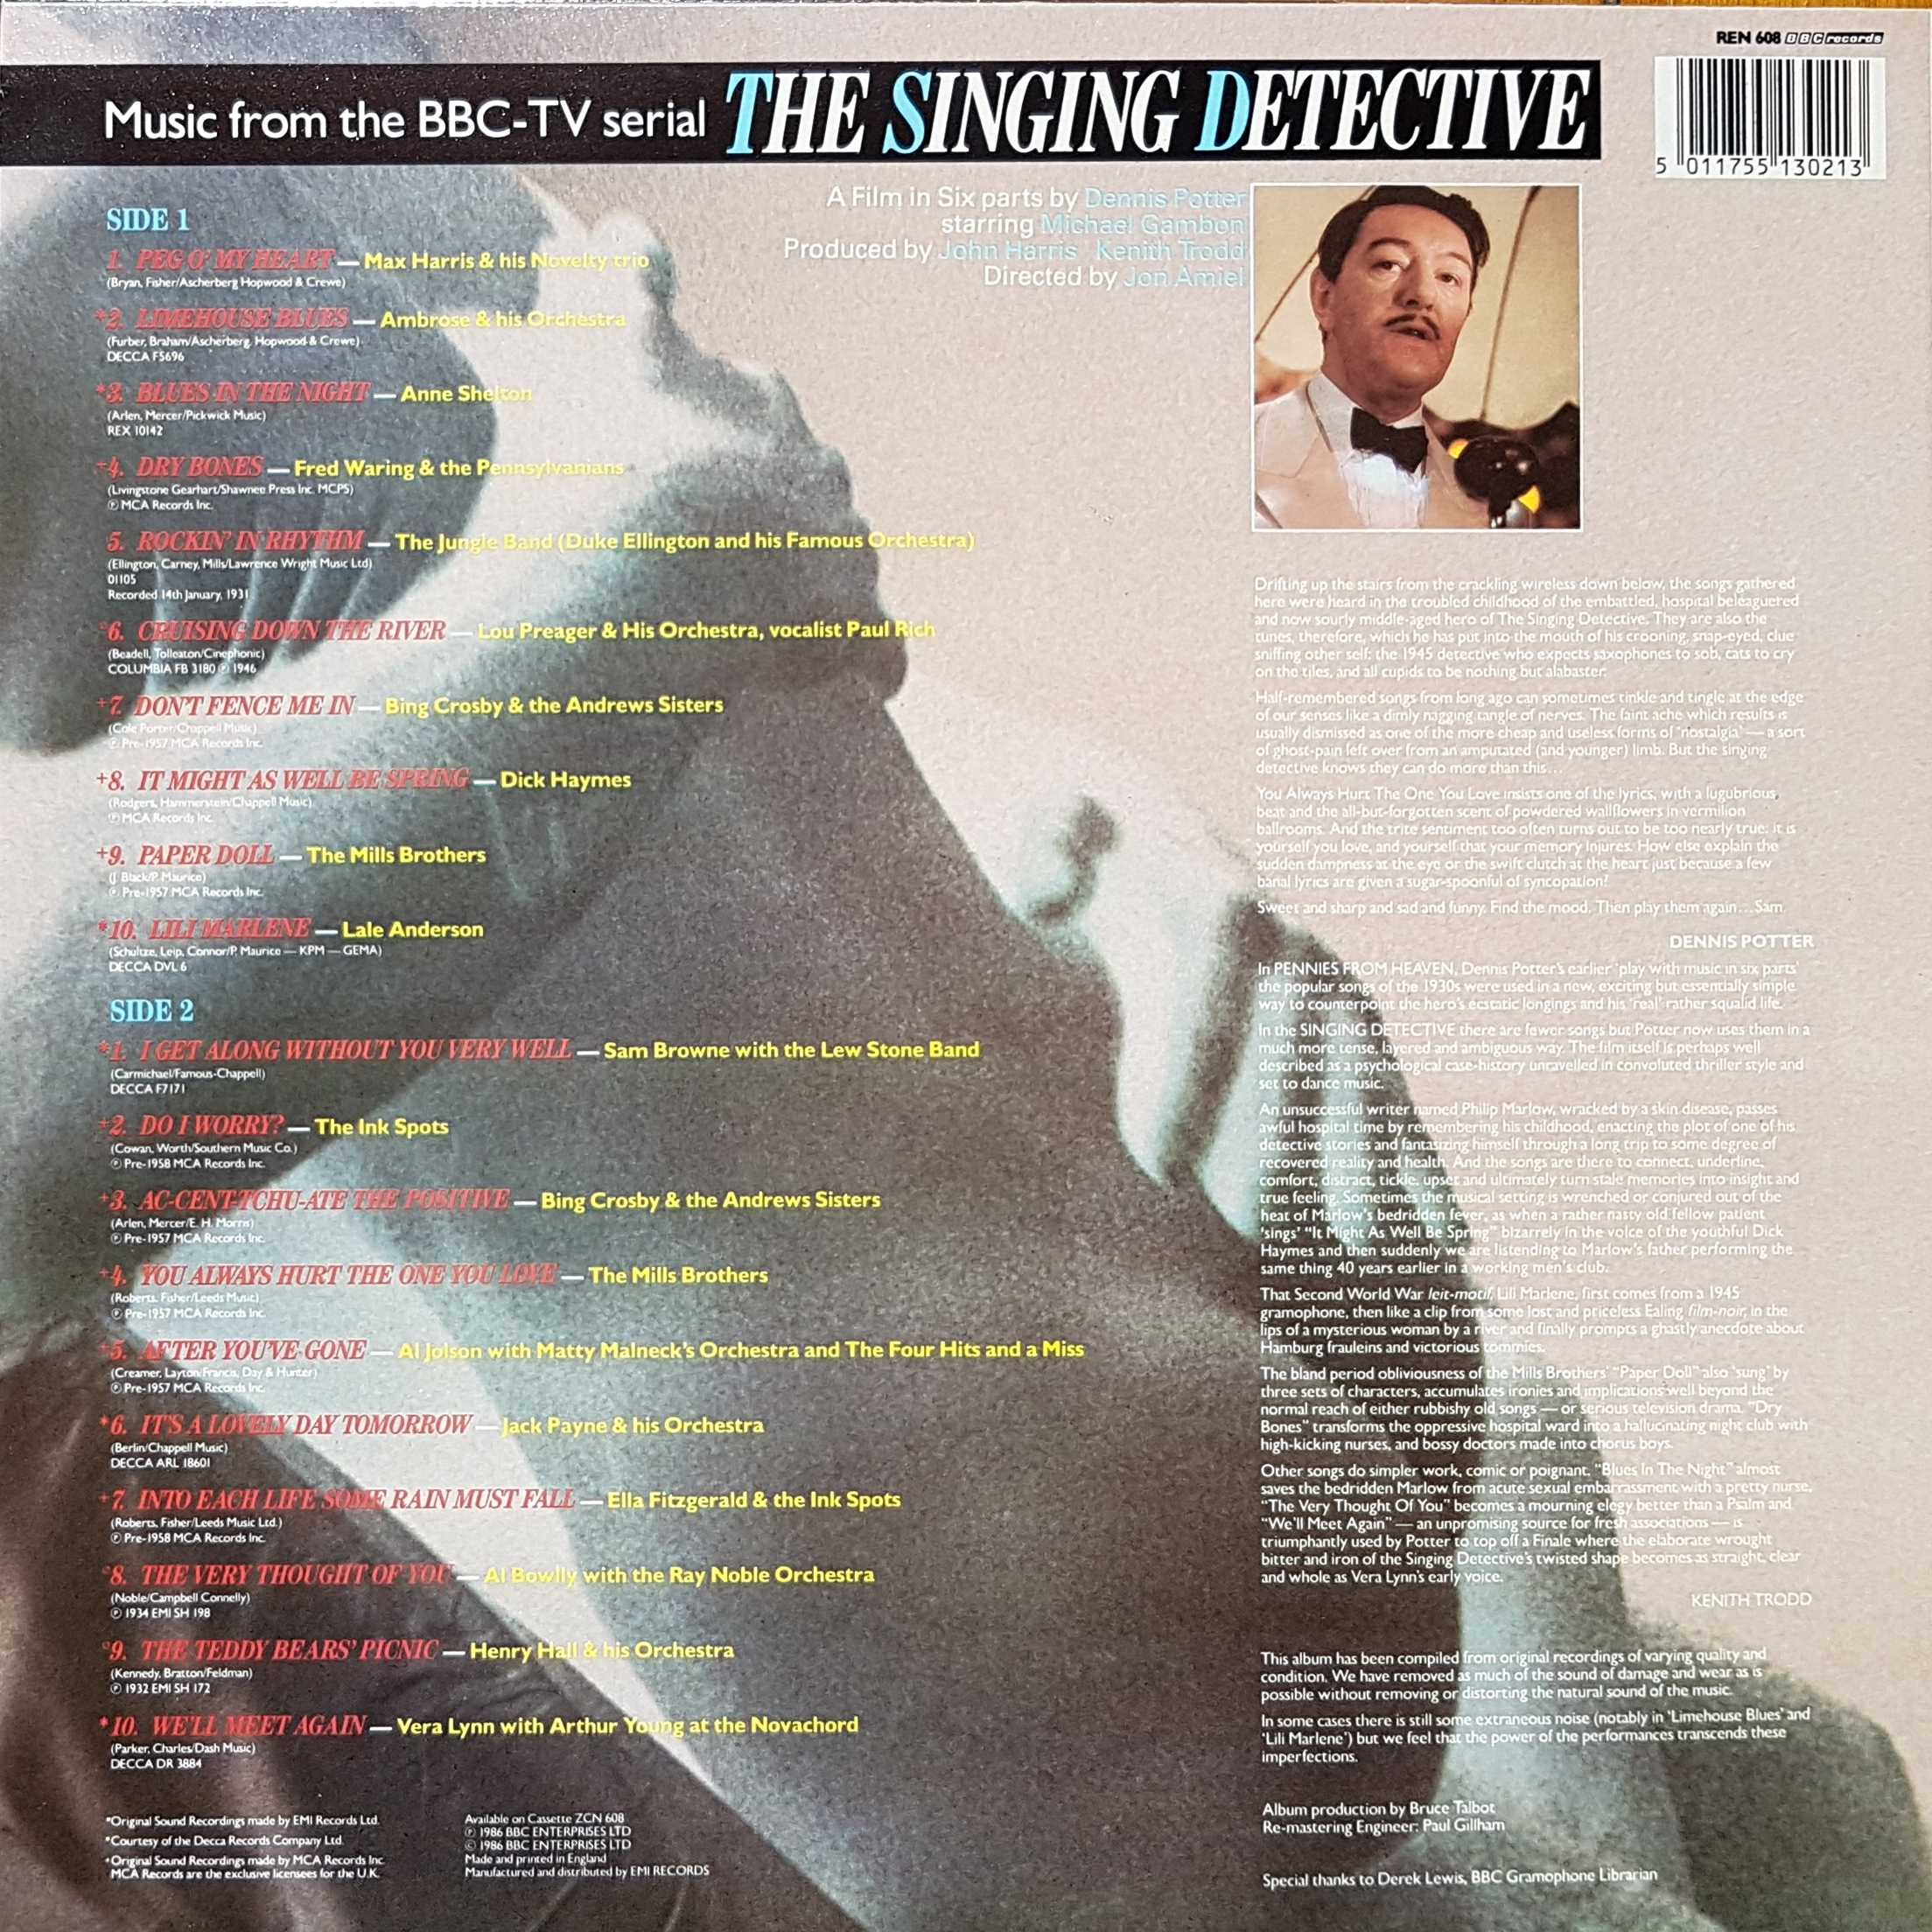 Picture of REN 608 The singing detective by artist Various from the BBC records and Tapes library